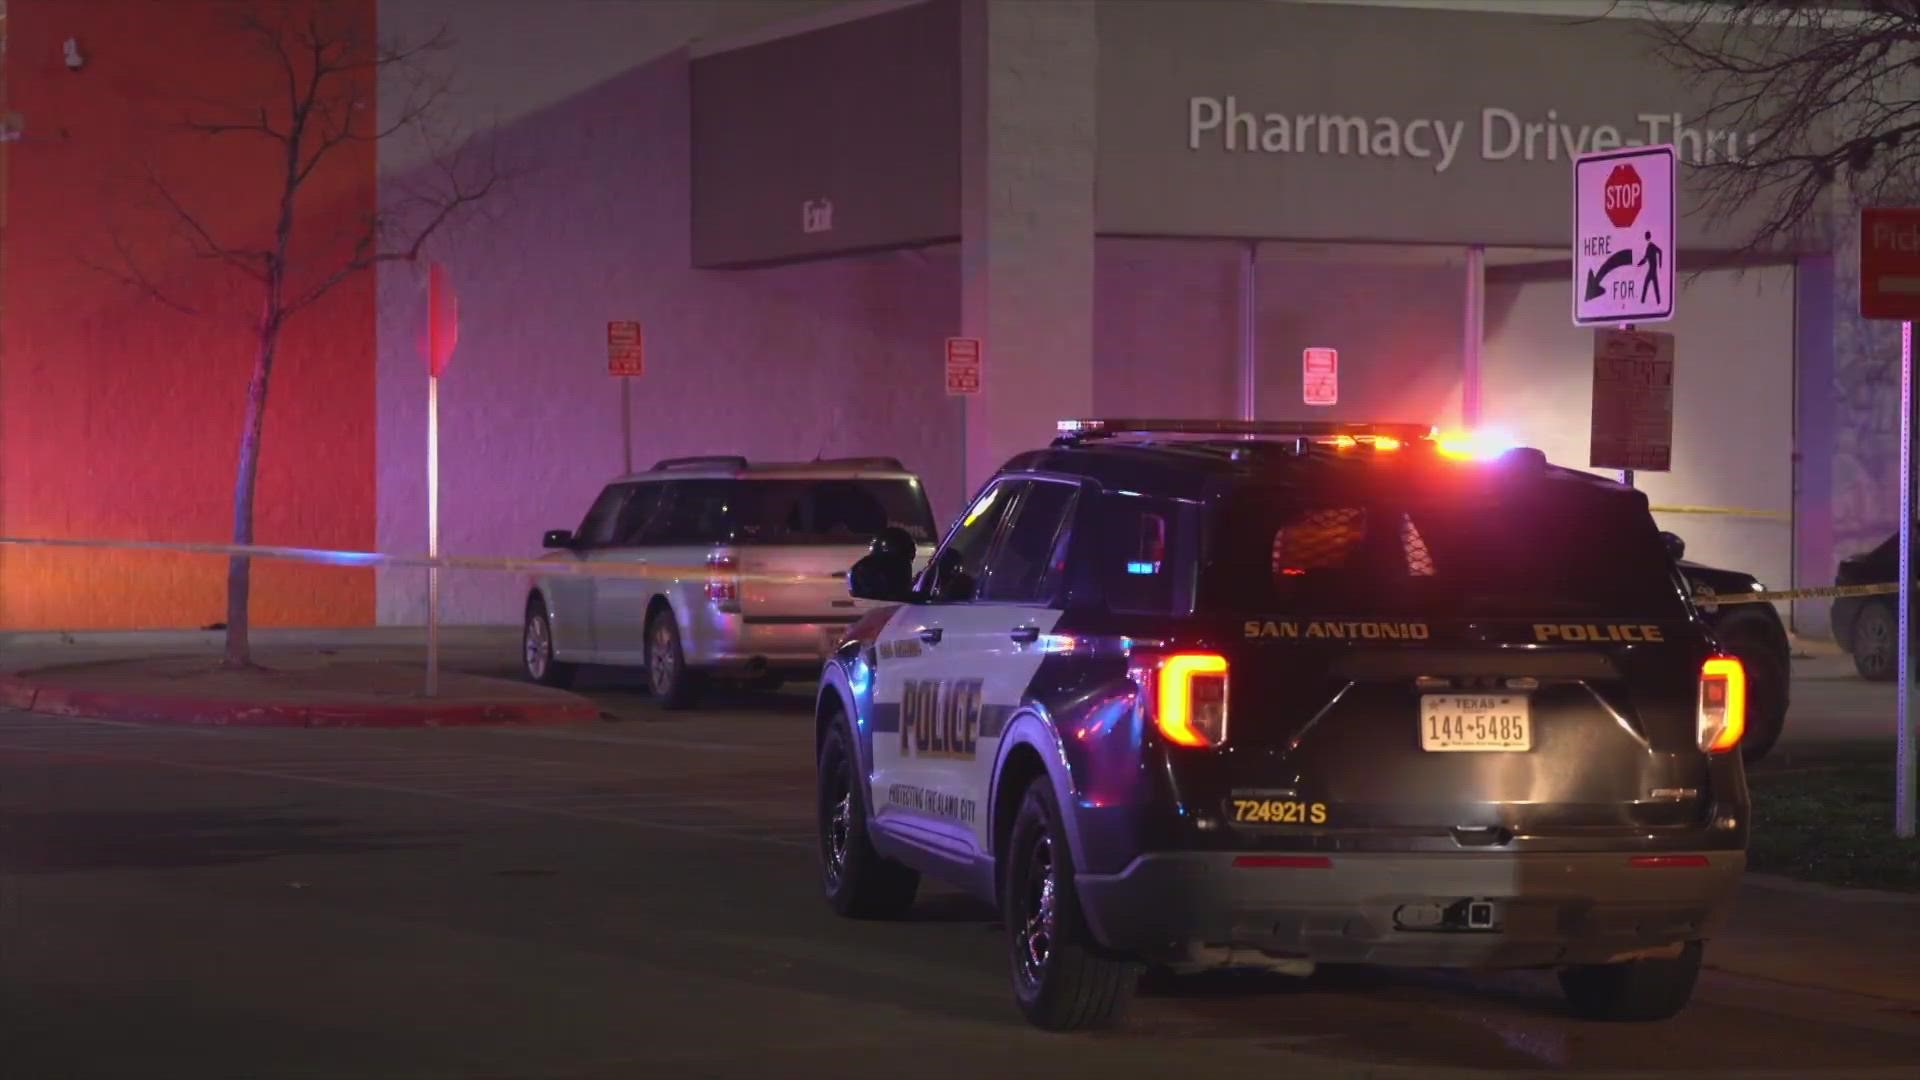 He was found shot in the chest outside of the southeast-side store.